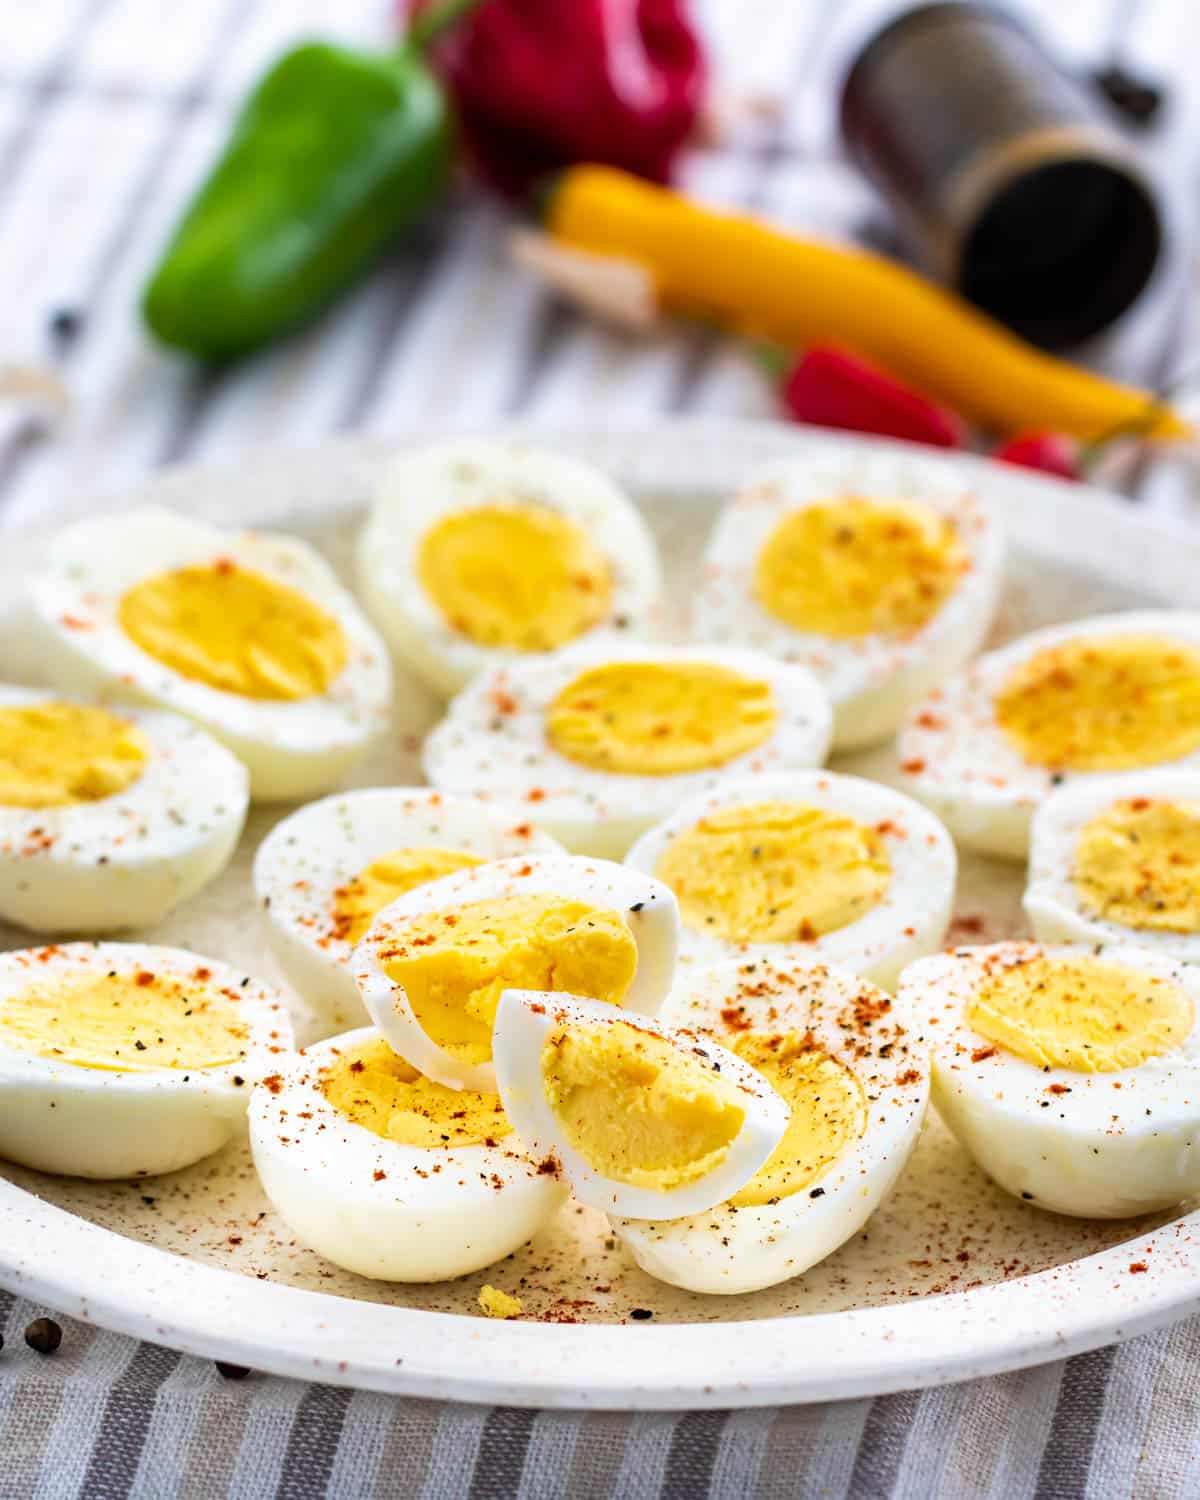 https://cravinghomecooked.com/wp-content/uploads/2020/01/perfect-hard-boiled-eggs-1-9.jpg